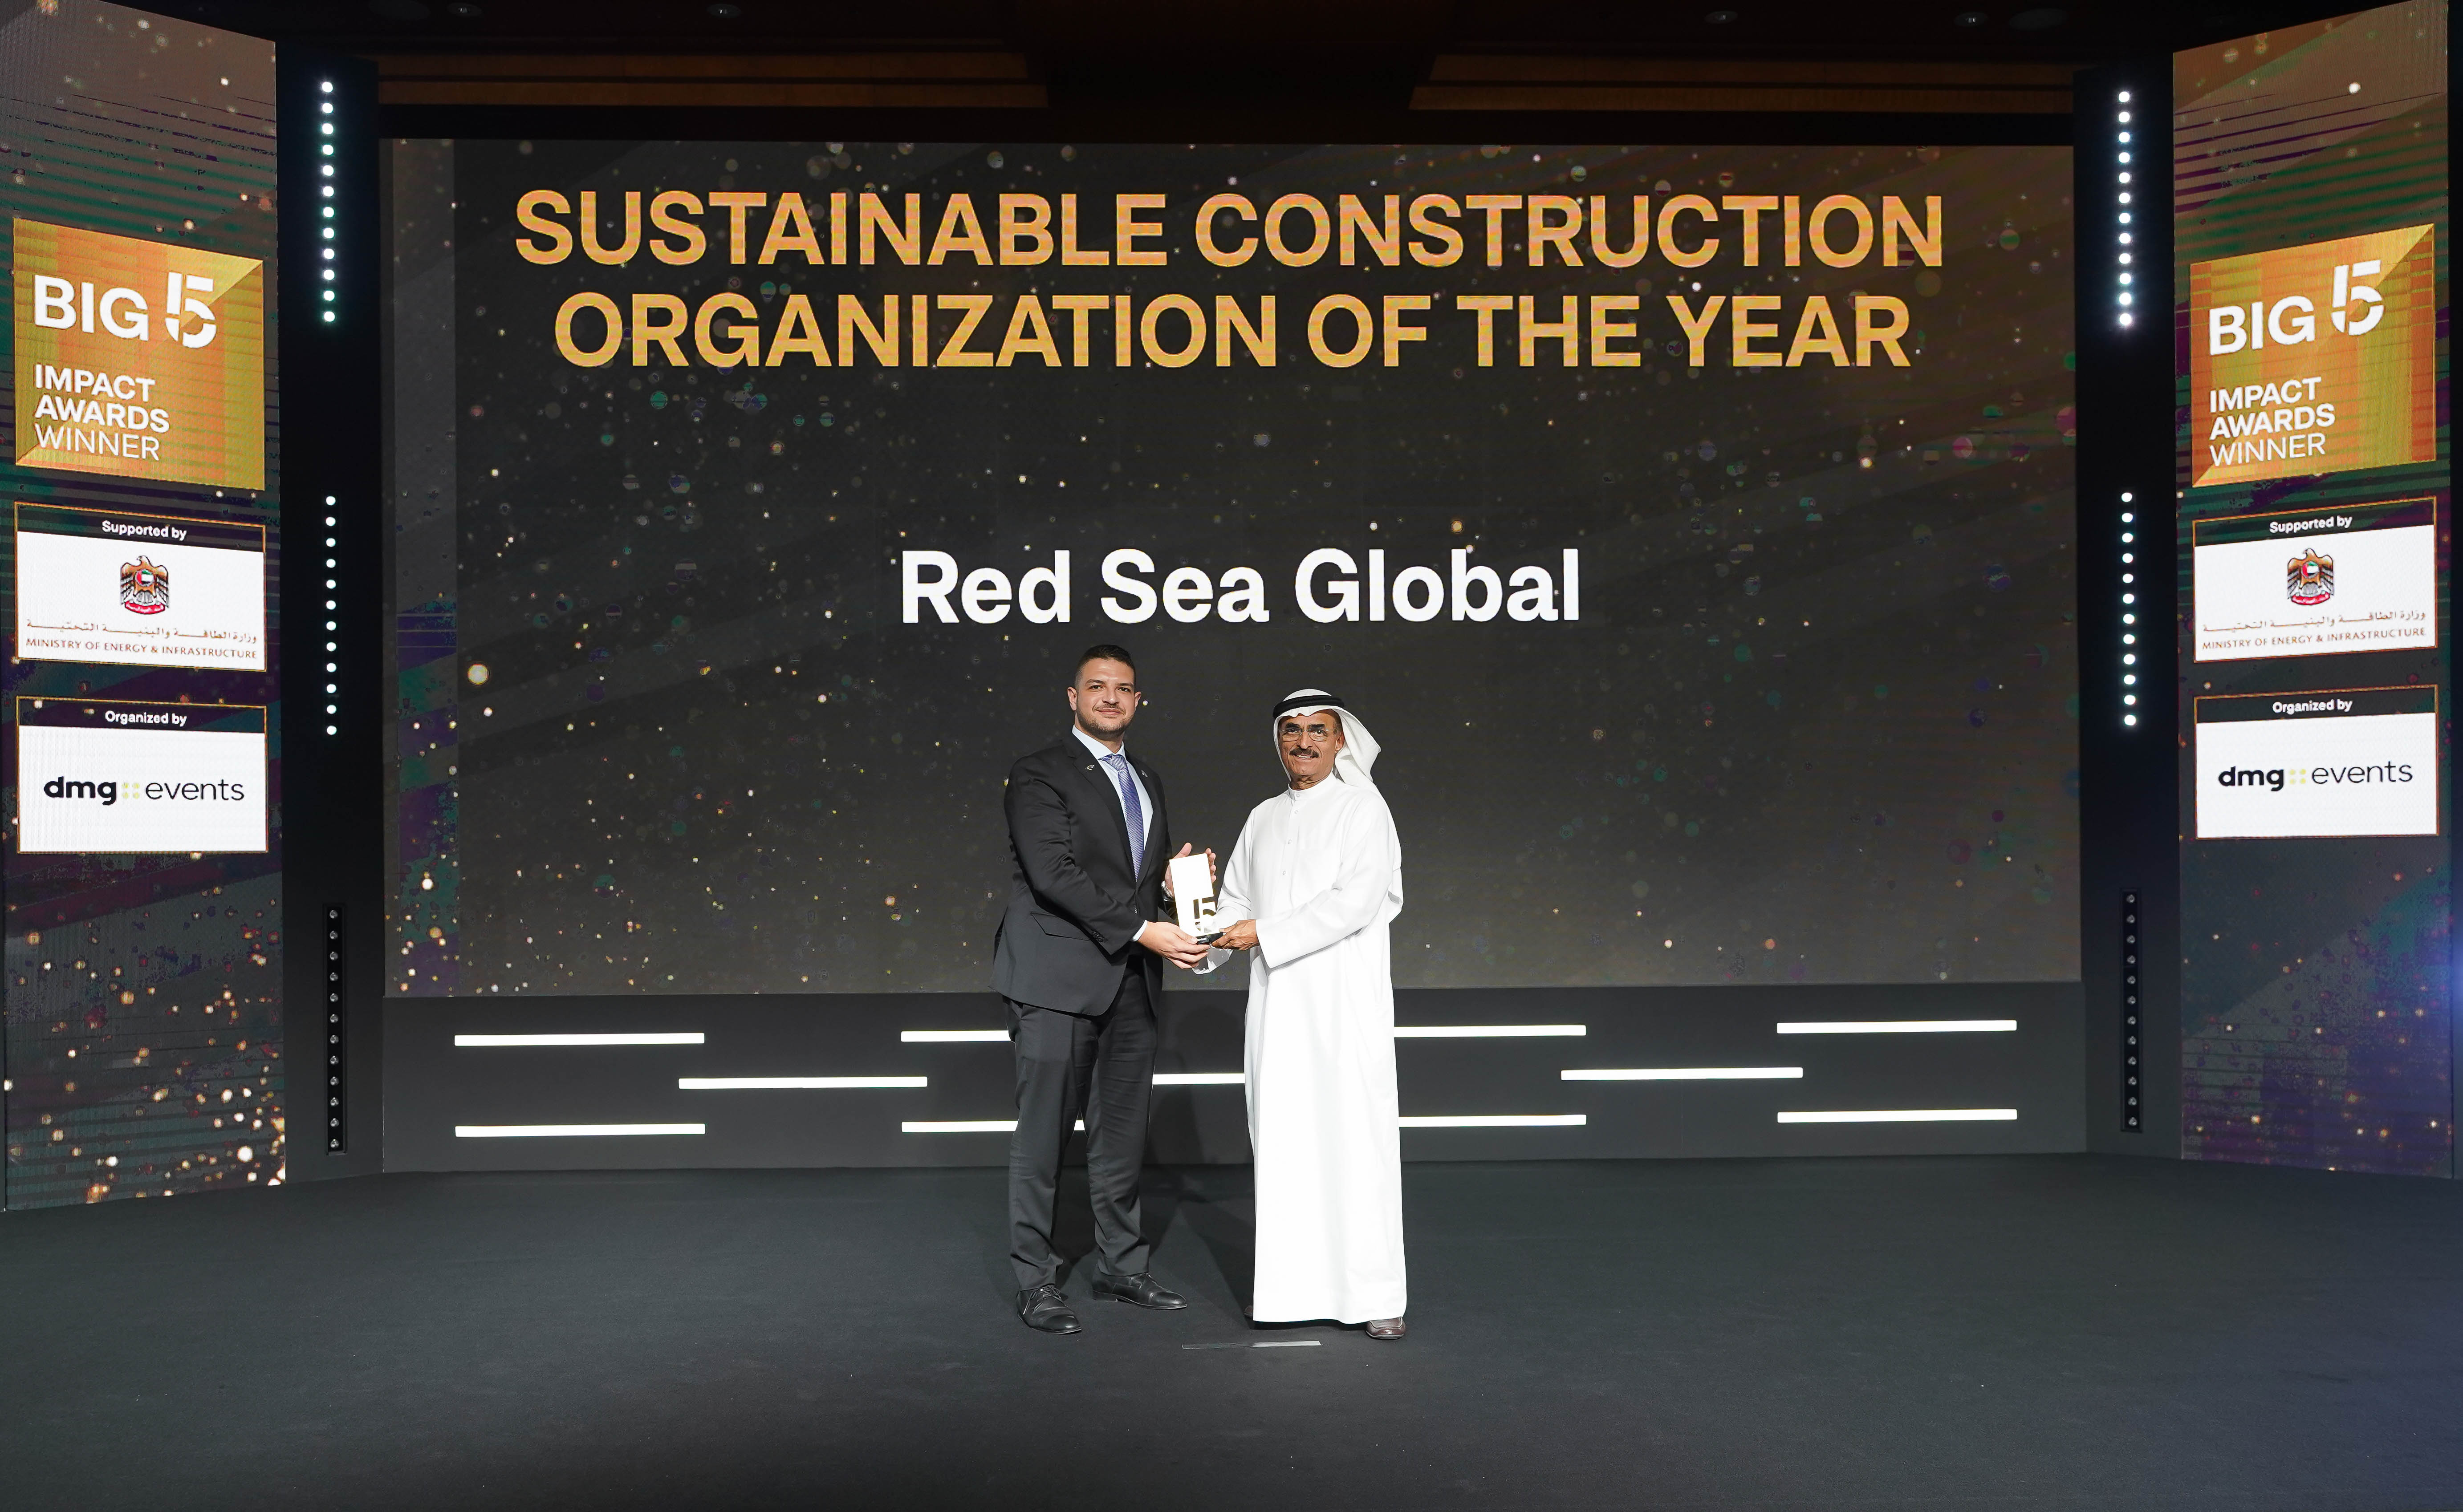 Sustainable Construction Organization of the Year at Big 5 Global Impact Awards